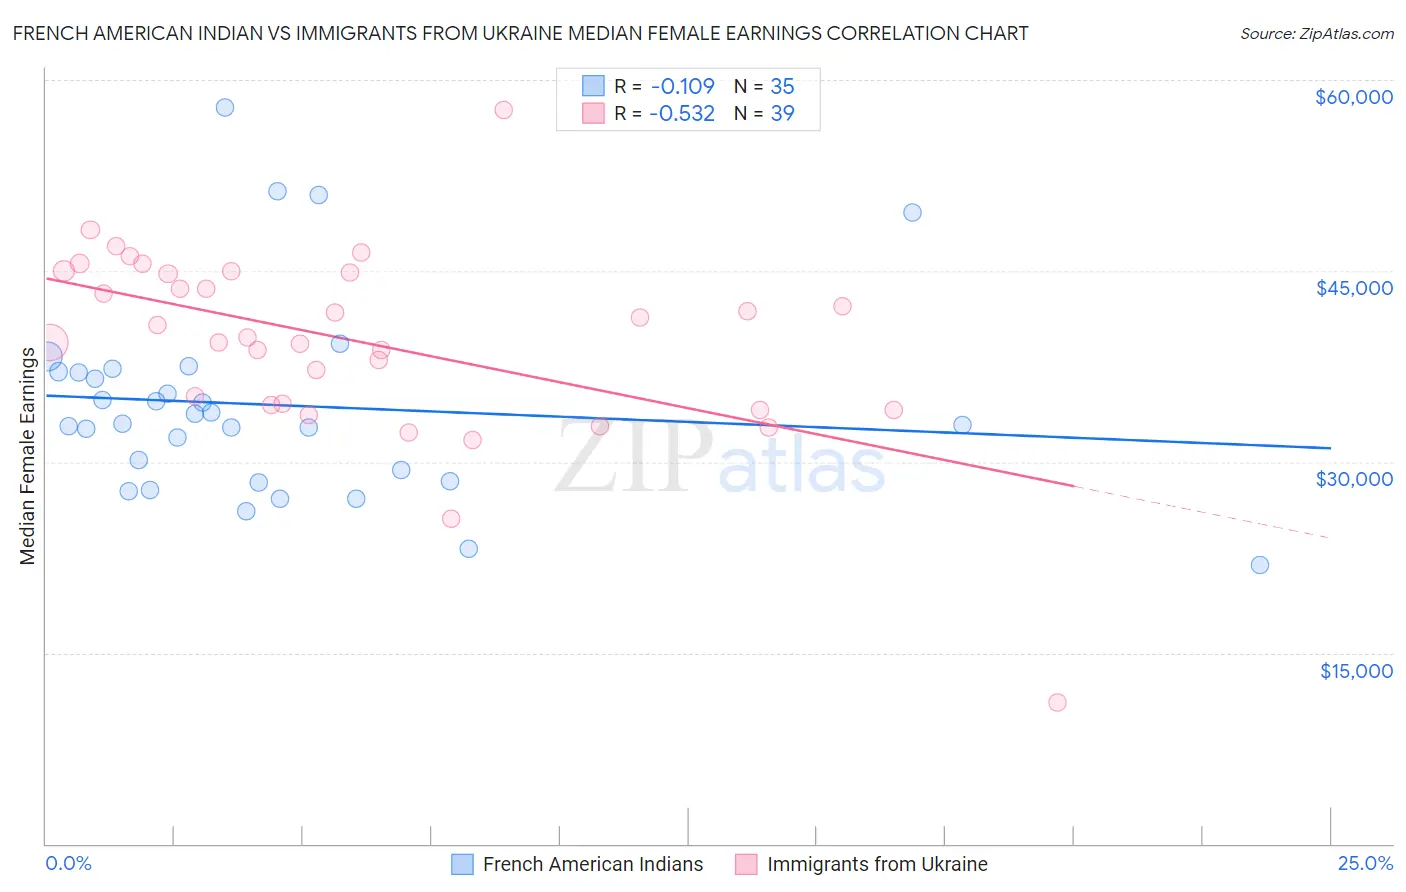 French American Indian vs Immigrants from Ukraine Median Female Earnings